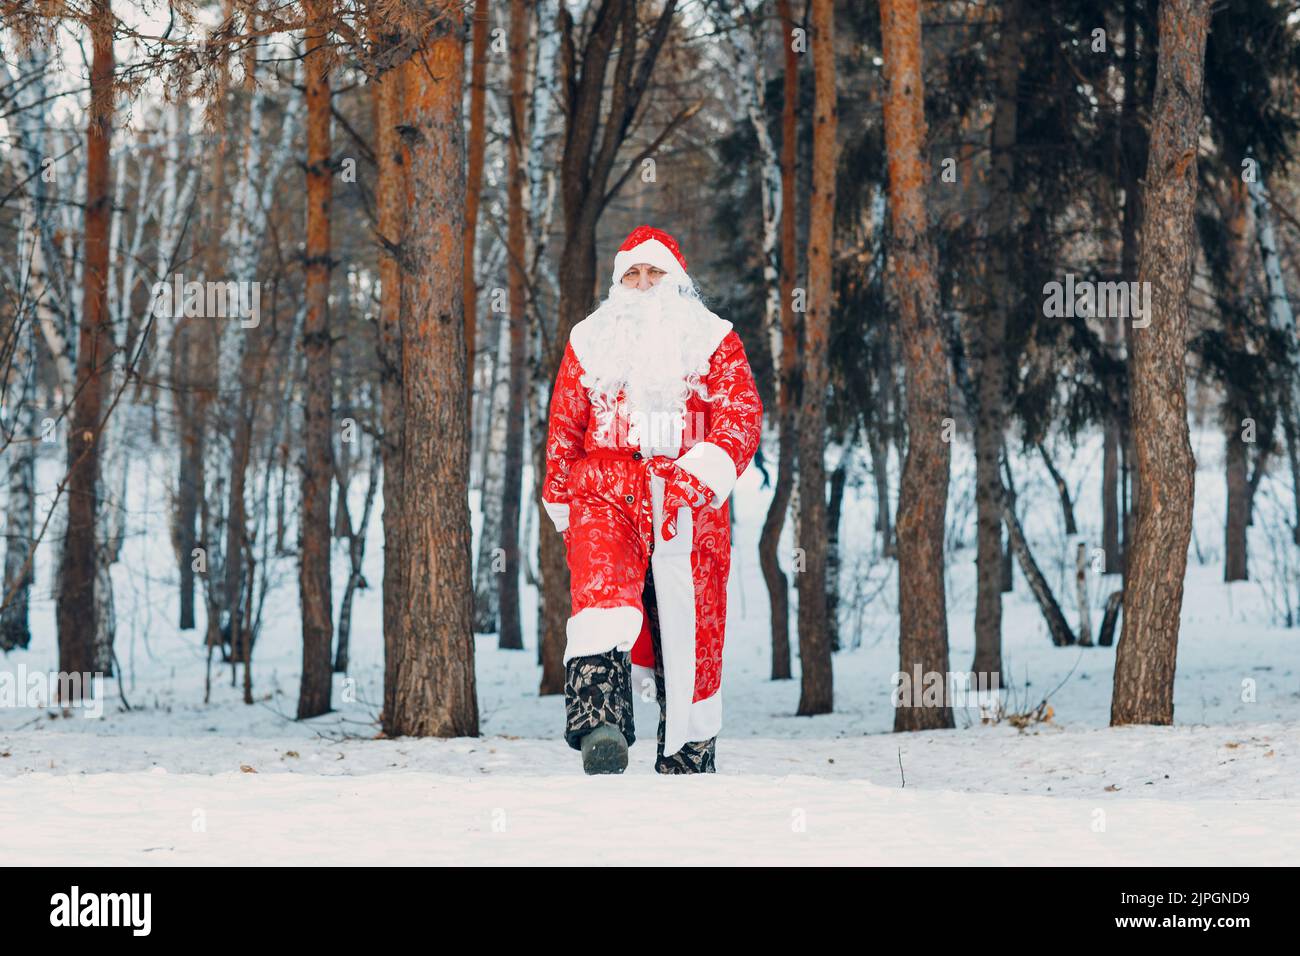 Santa Claus with tall white beard walking in the winter forest. Stock Photo